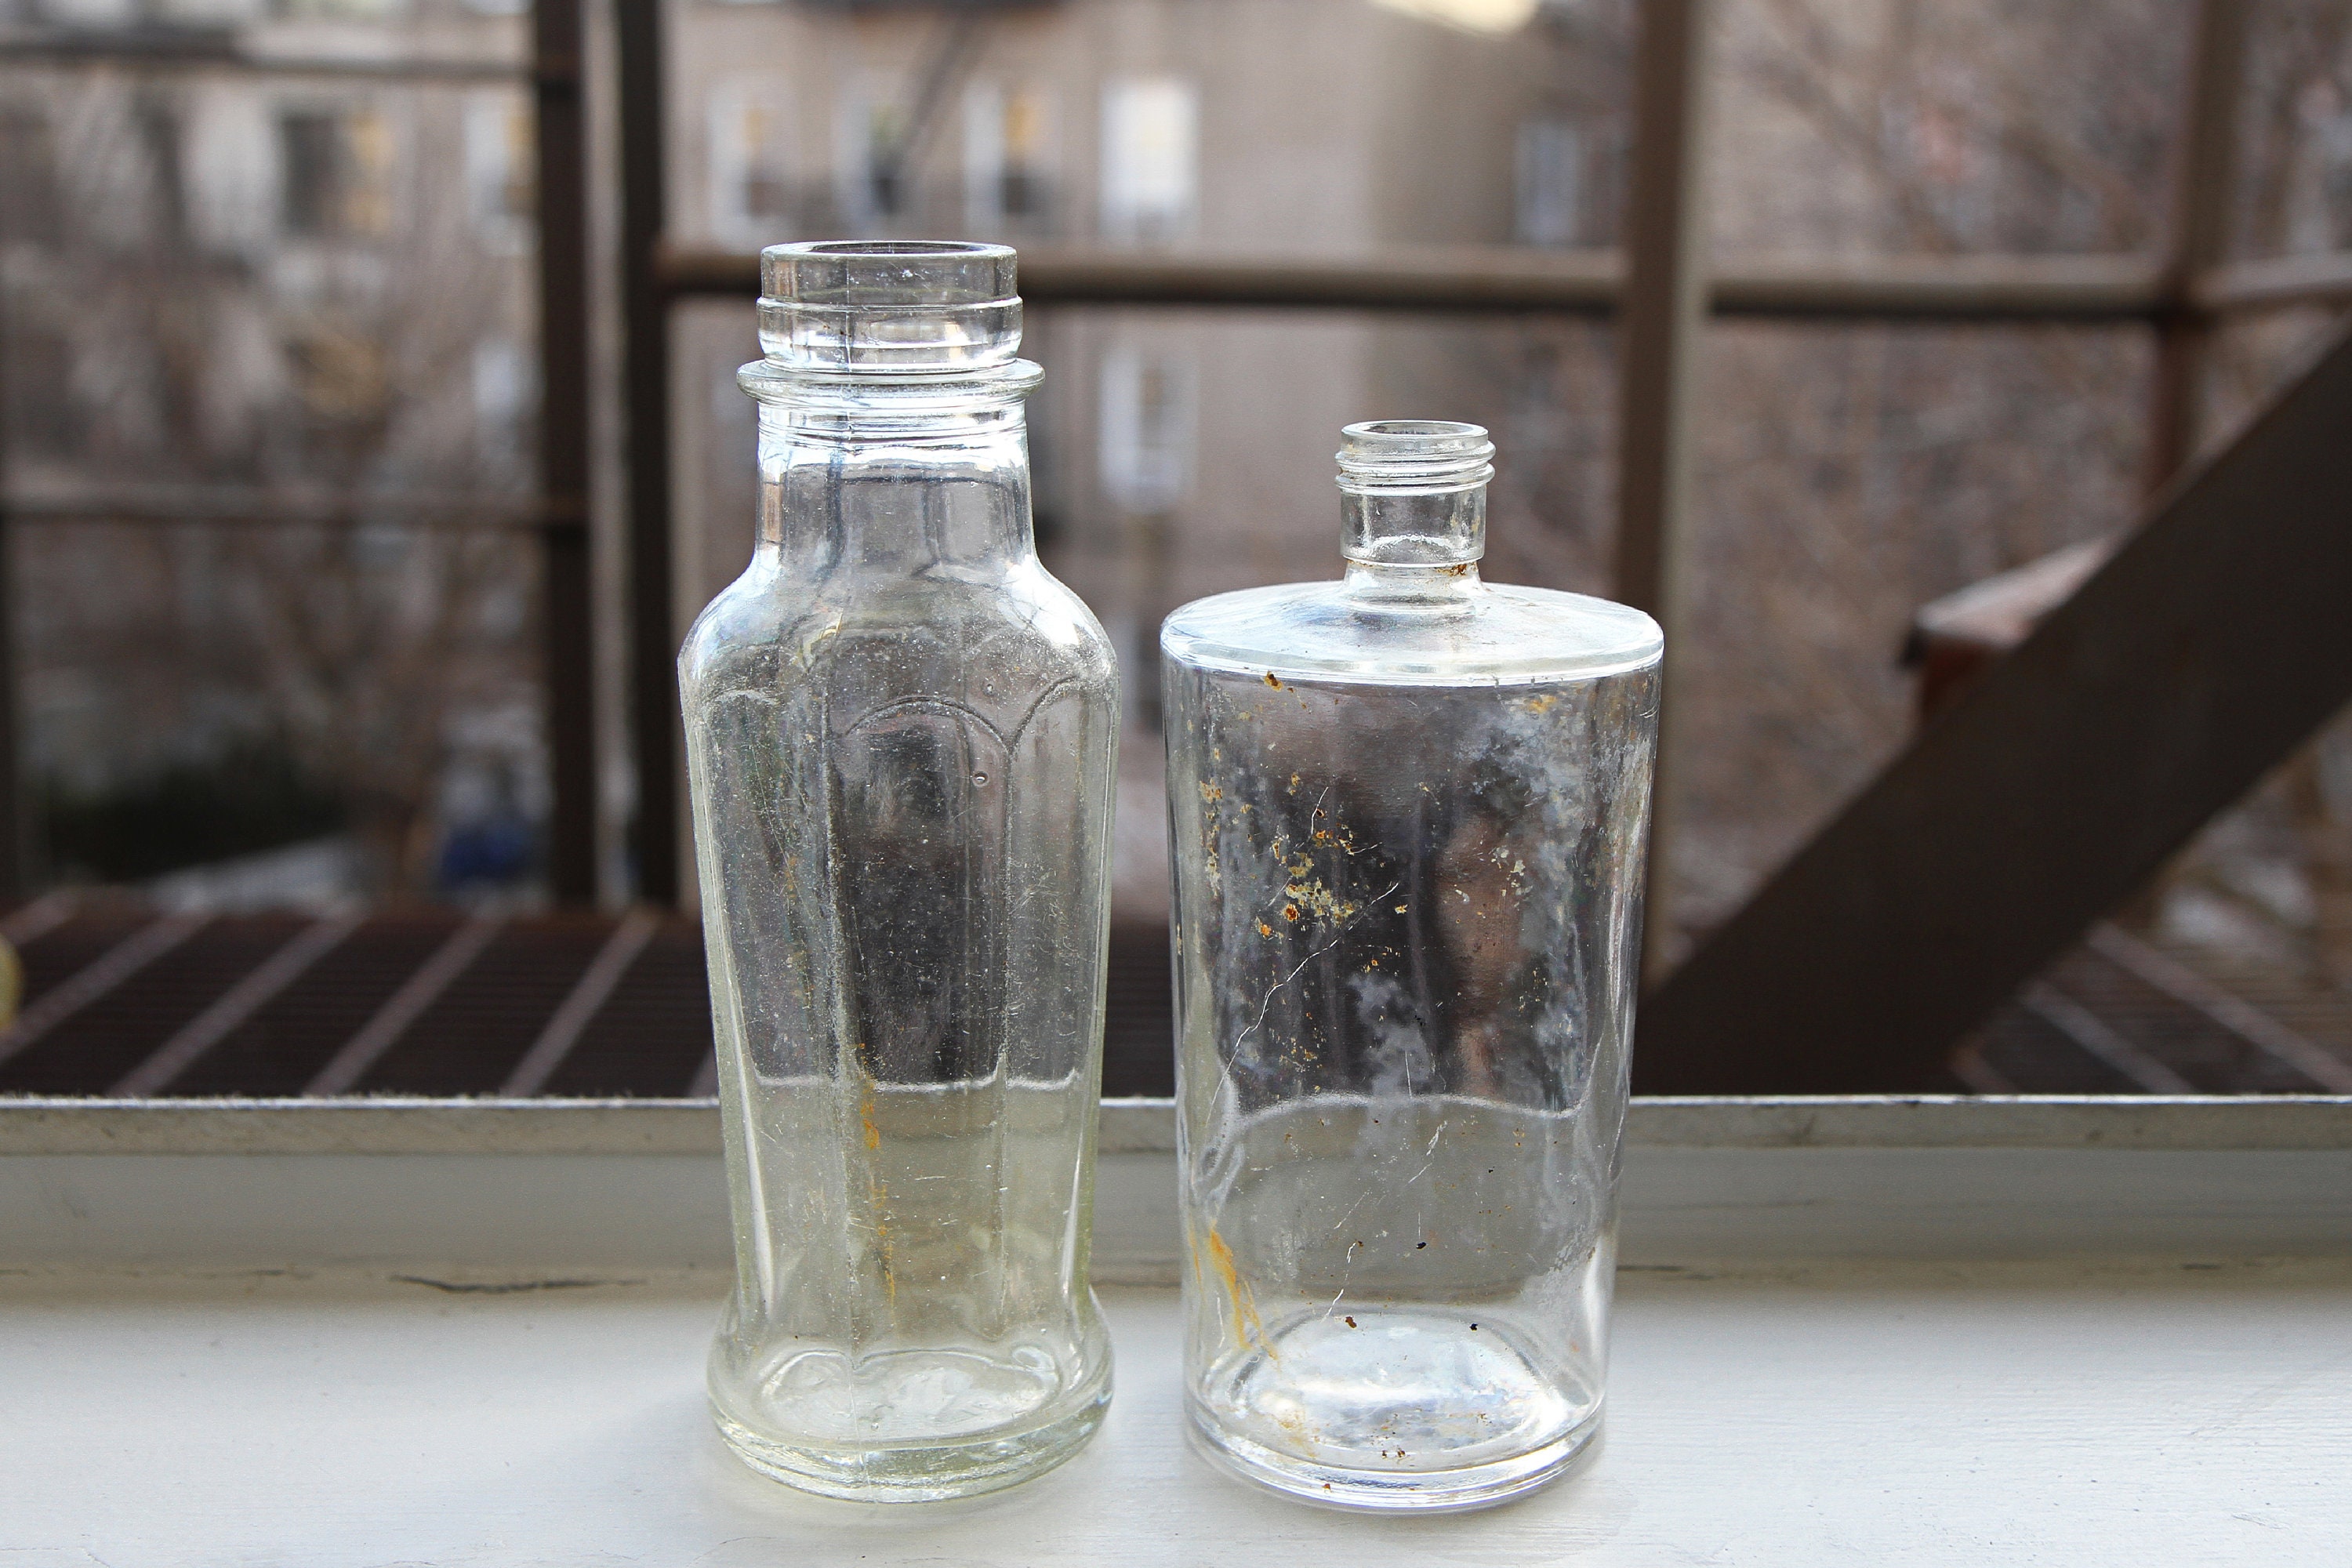 Lot of 3 Antique Clear Glass Bottles, Found in New York USA, Three  Minimalist Glass Bottles, Squibb Medicine Bottle 8 Paneled, Retro Glass 